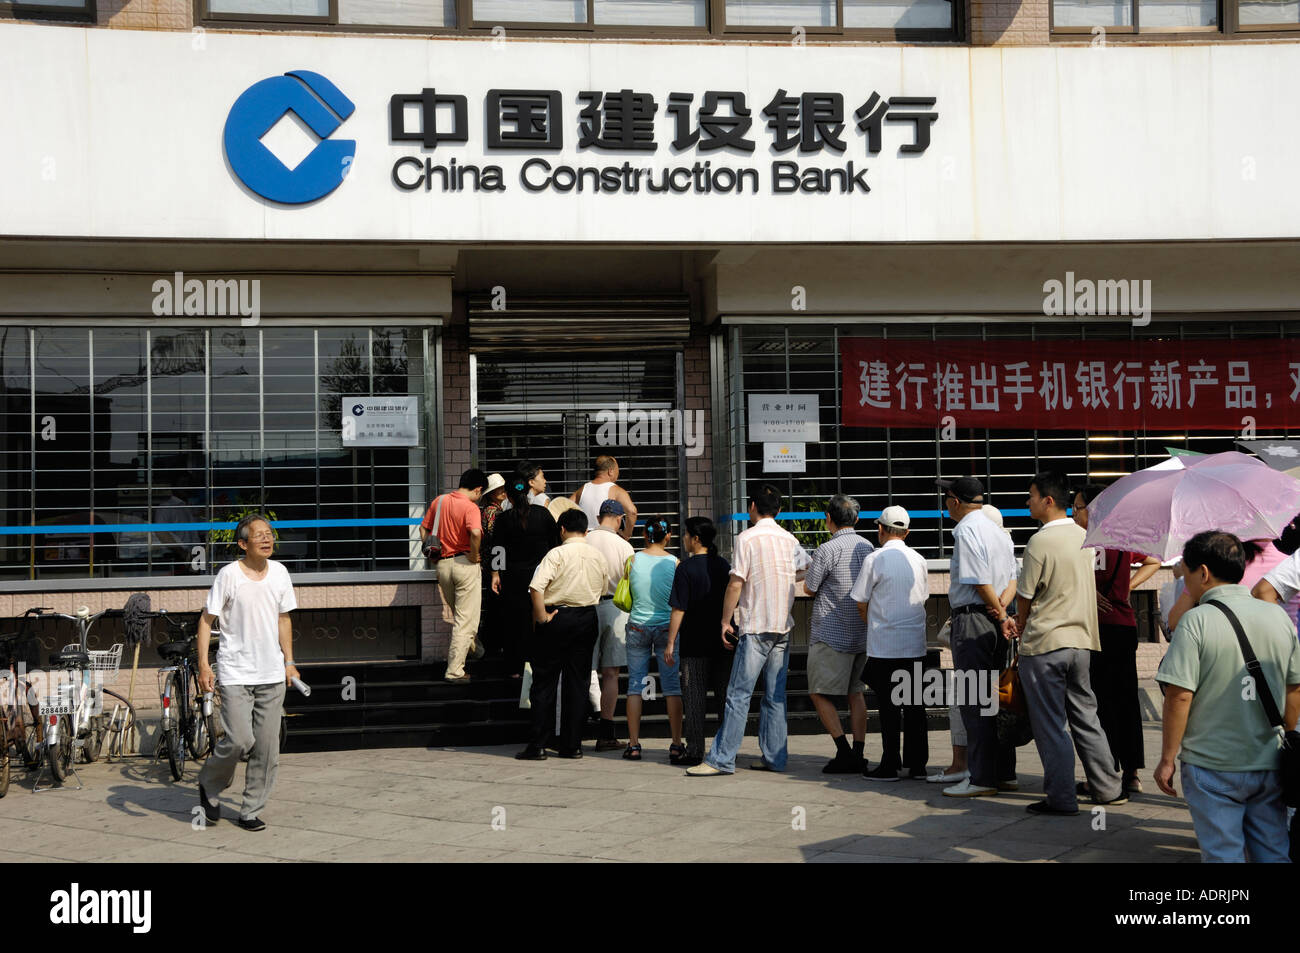 People line up to enter a China Construction Bank branch in the early morning Beijing China 15 Aug 2007 Stock Photo